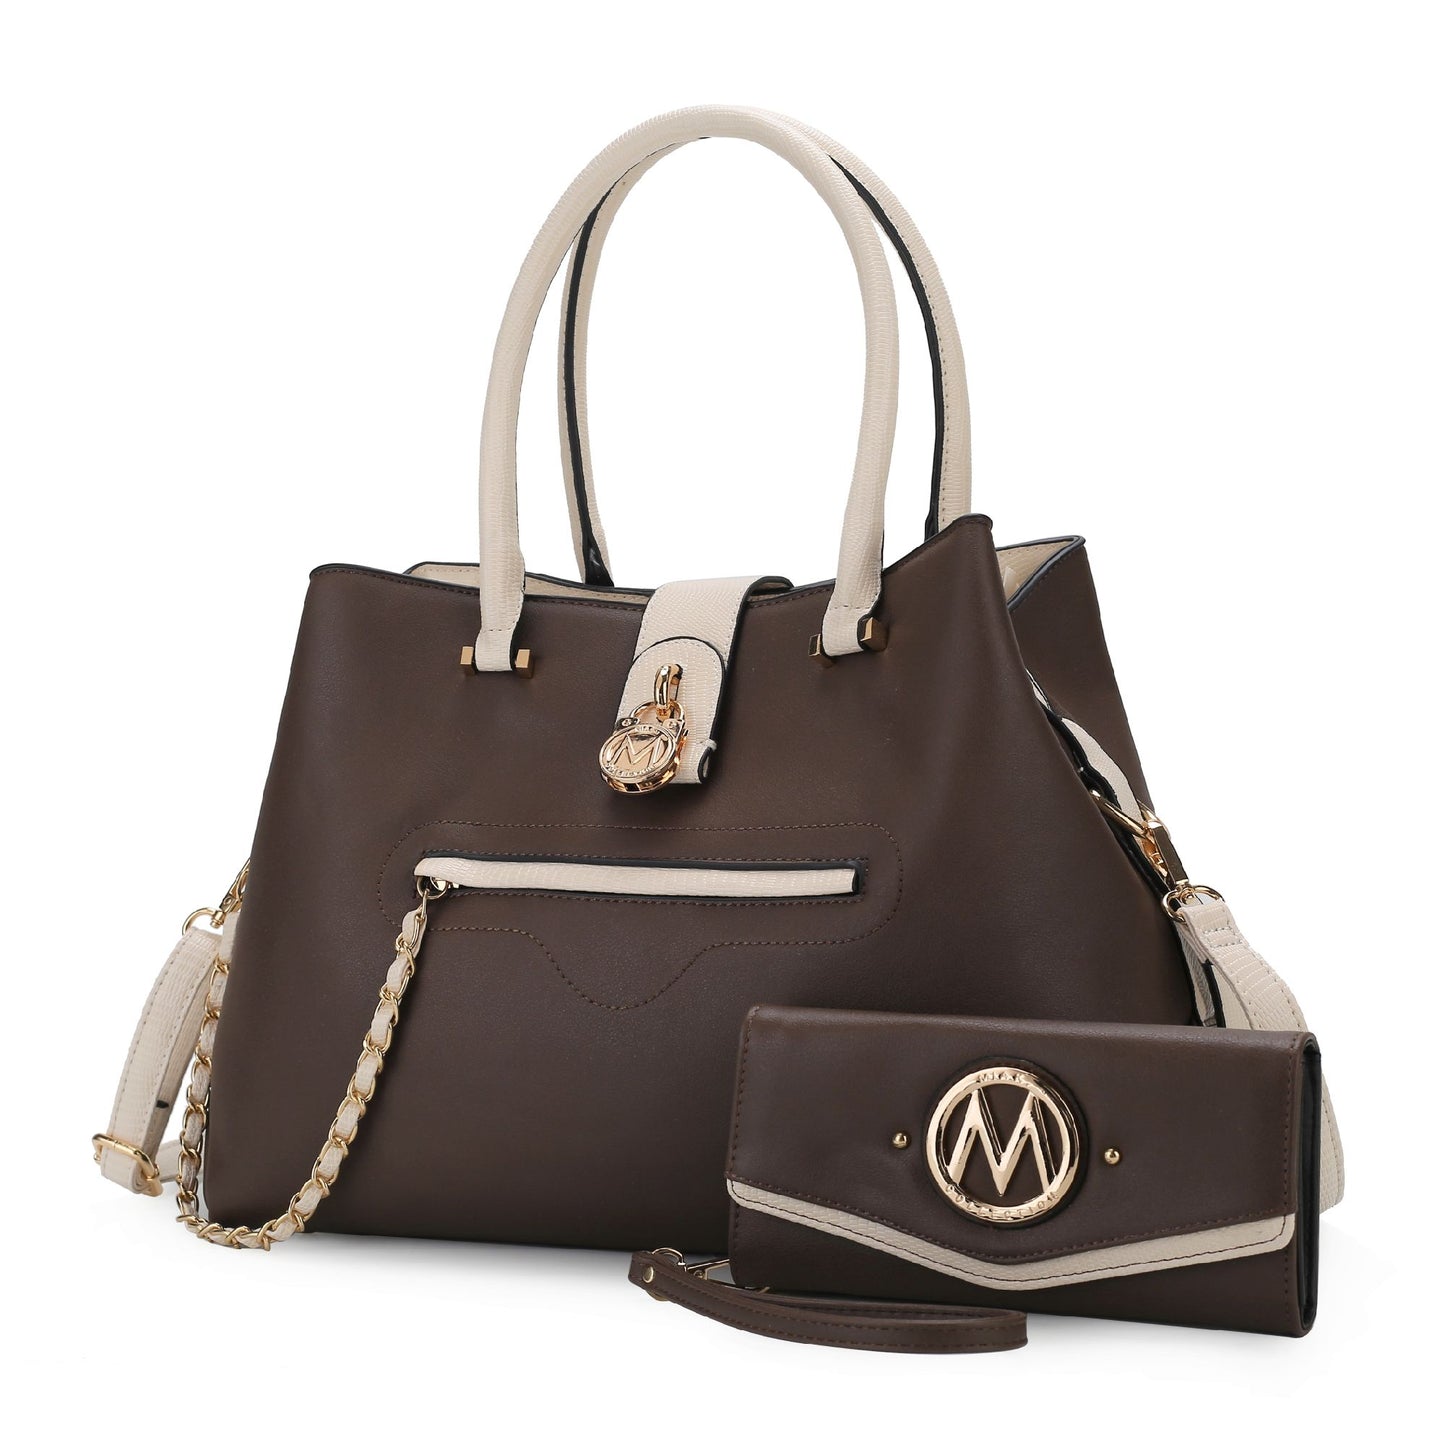 MKF Collection Edith Vegan Leather Women Tote Handbag with wallet by Mia K